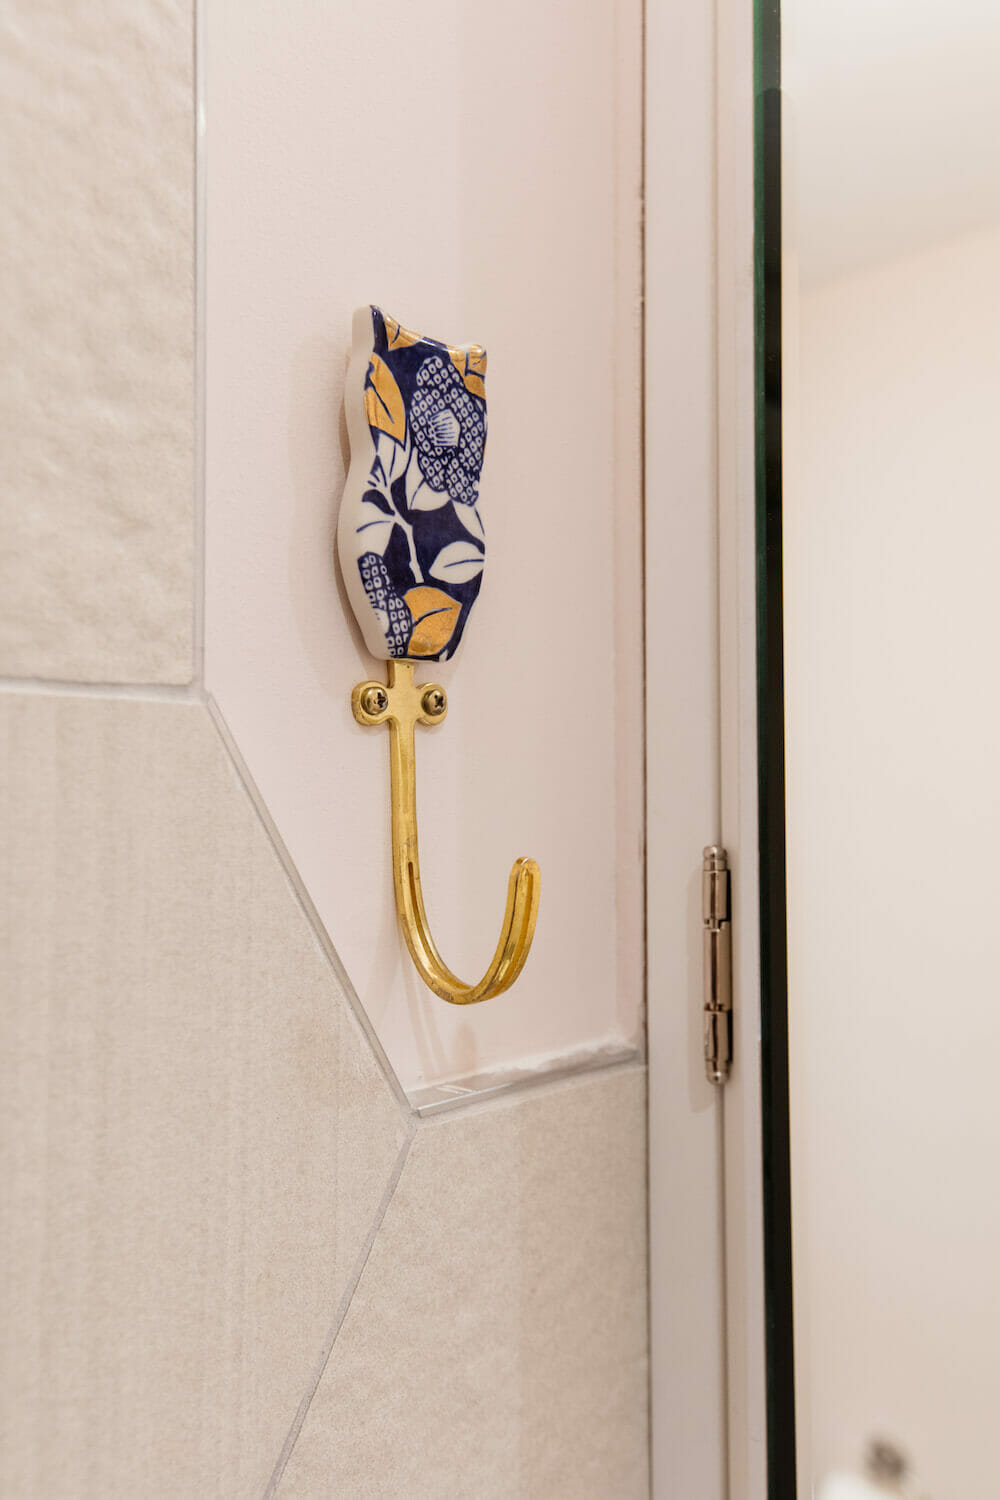 Bathrobe hook with cat design on hexagon tiled wall after renovation